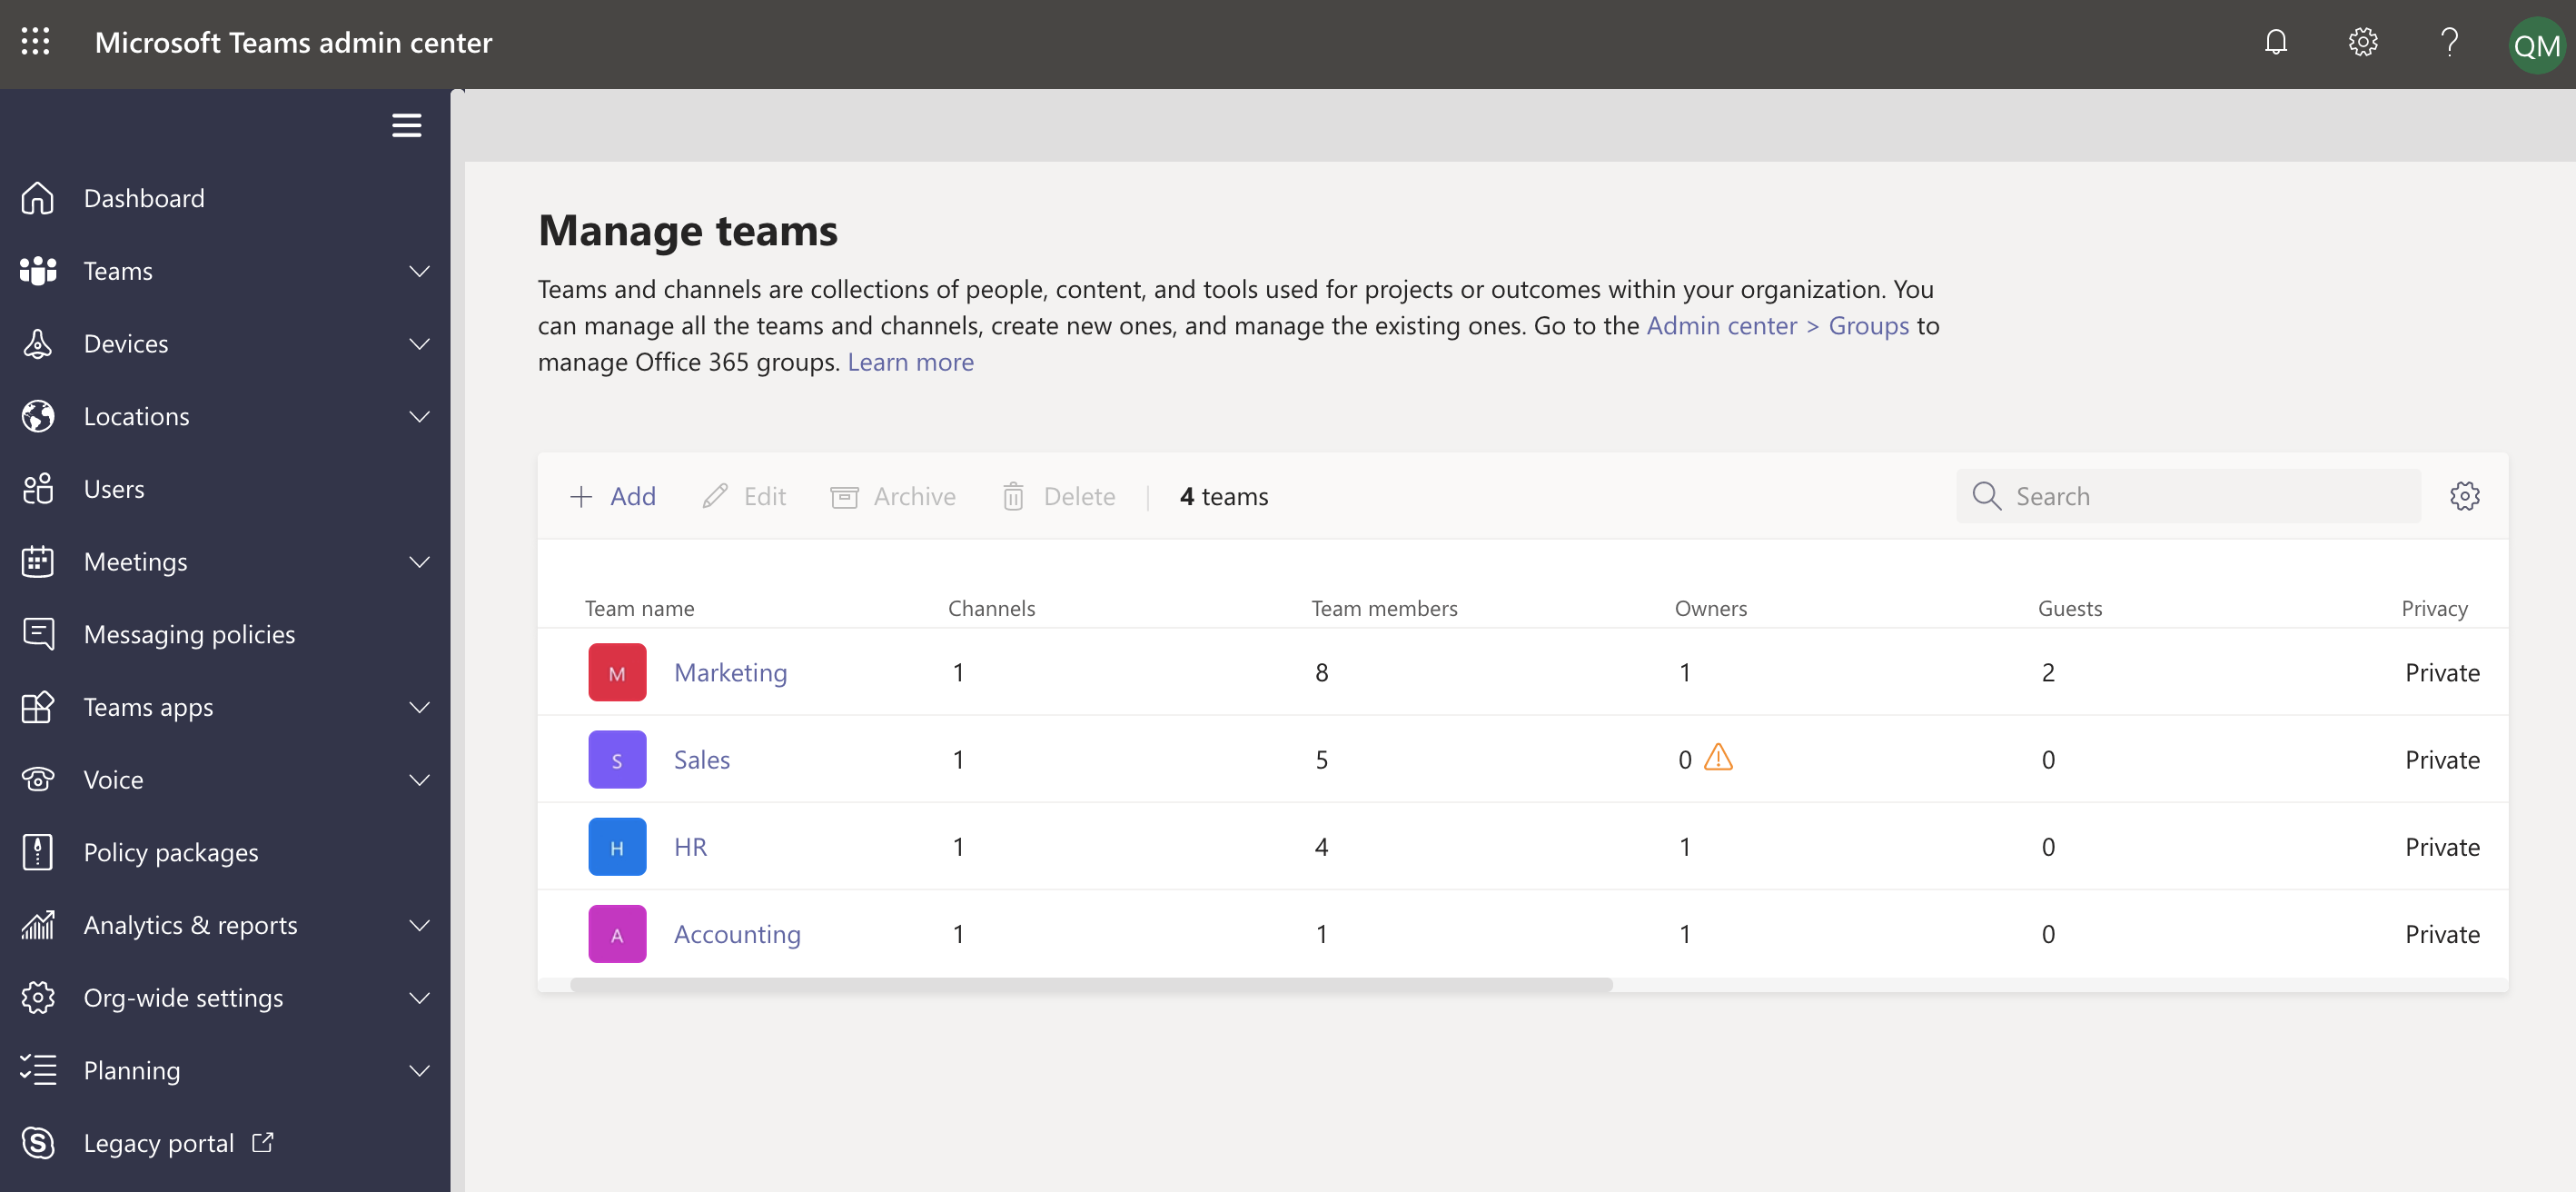 See which teams are ownerless in the Microsoft Teams admin center.